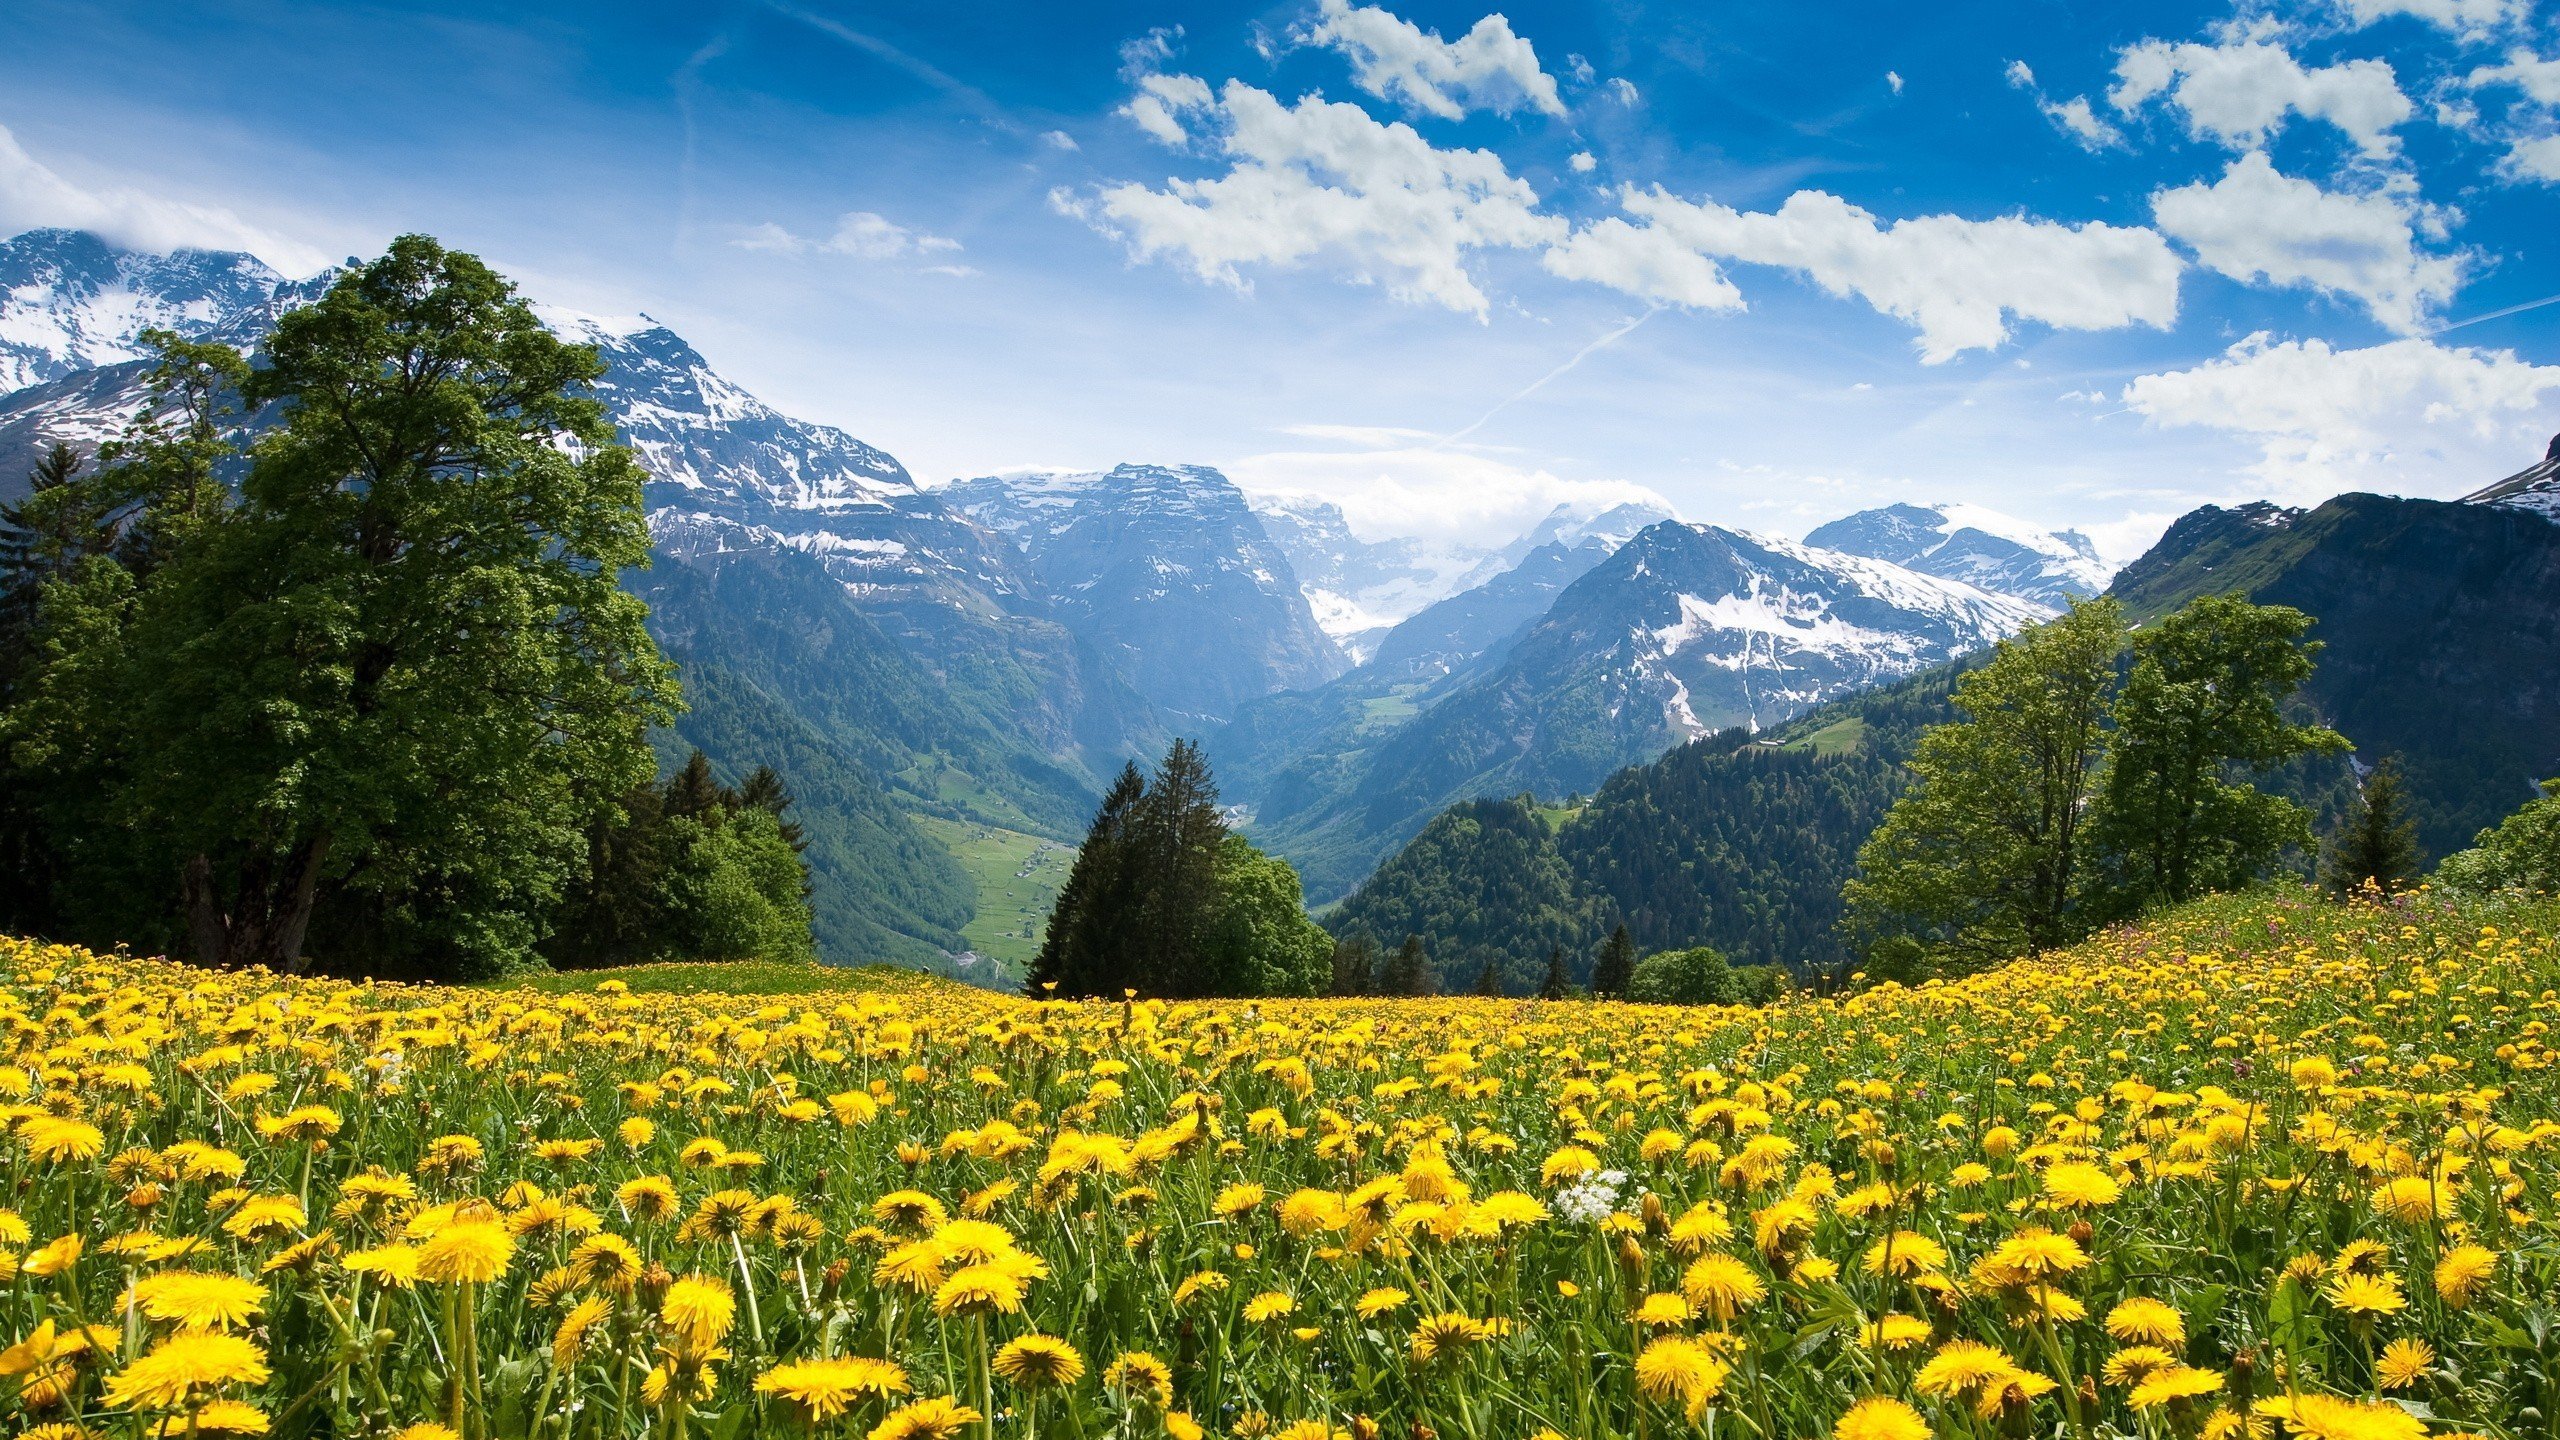  download mountains landscape nature mountain spring meadow 2560x1440